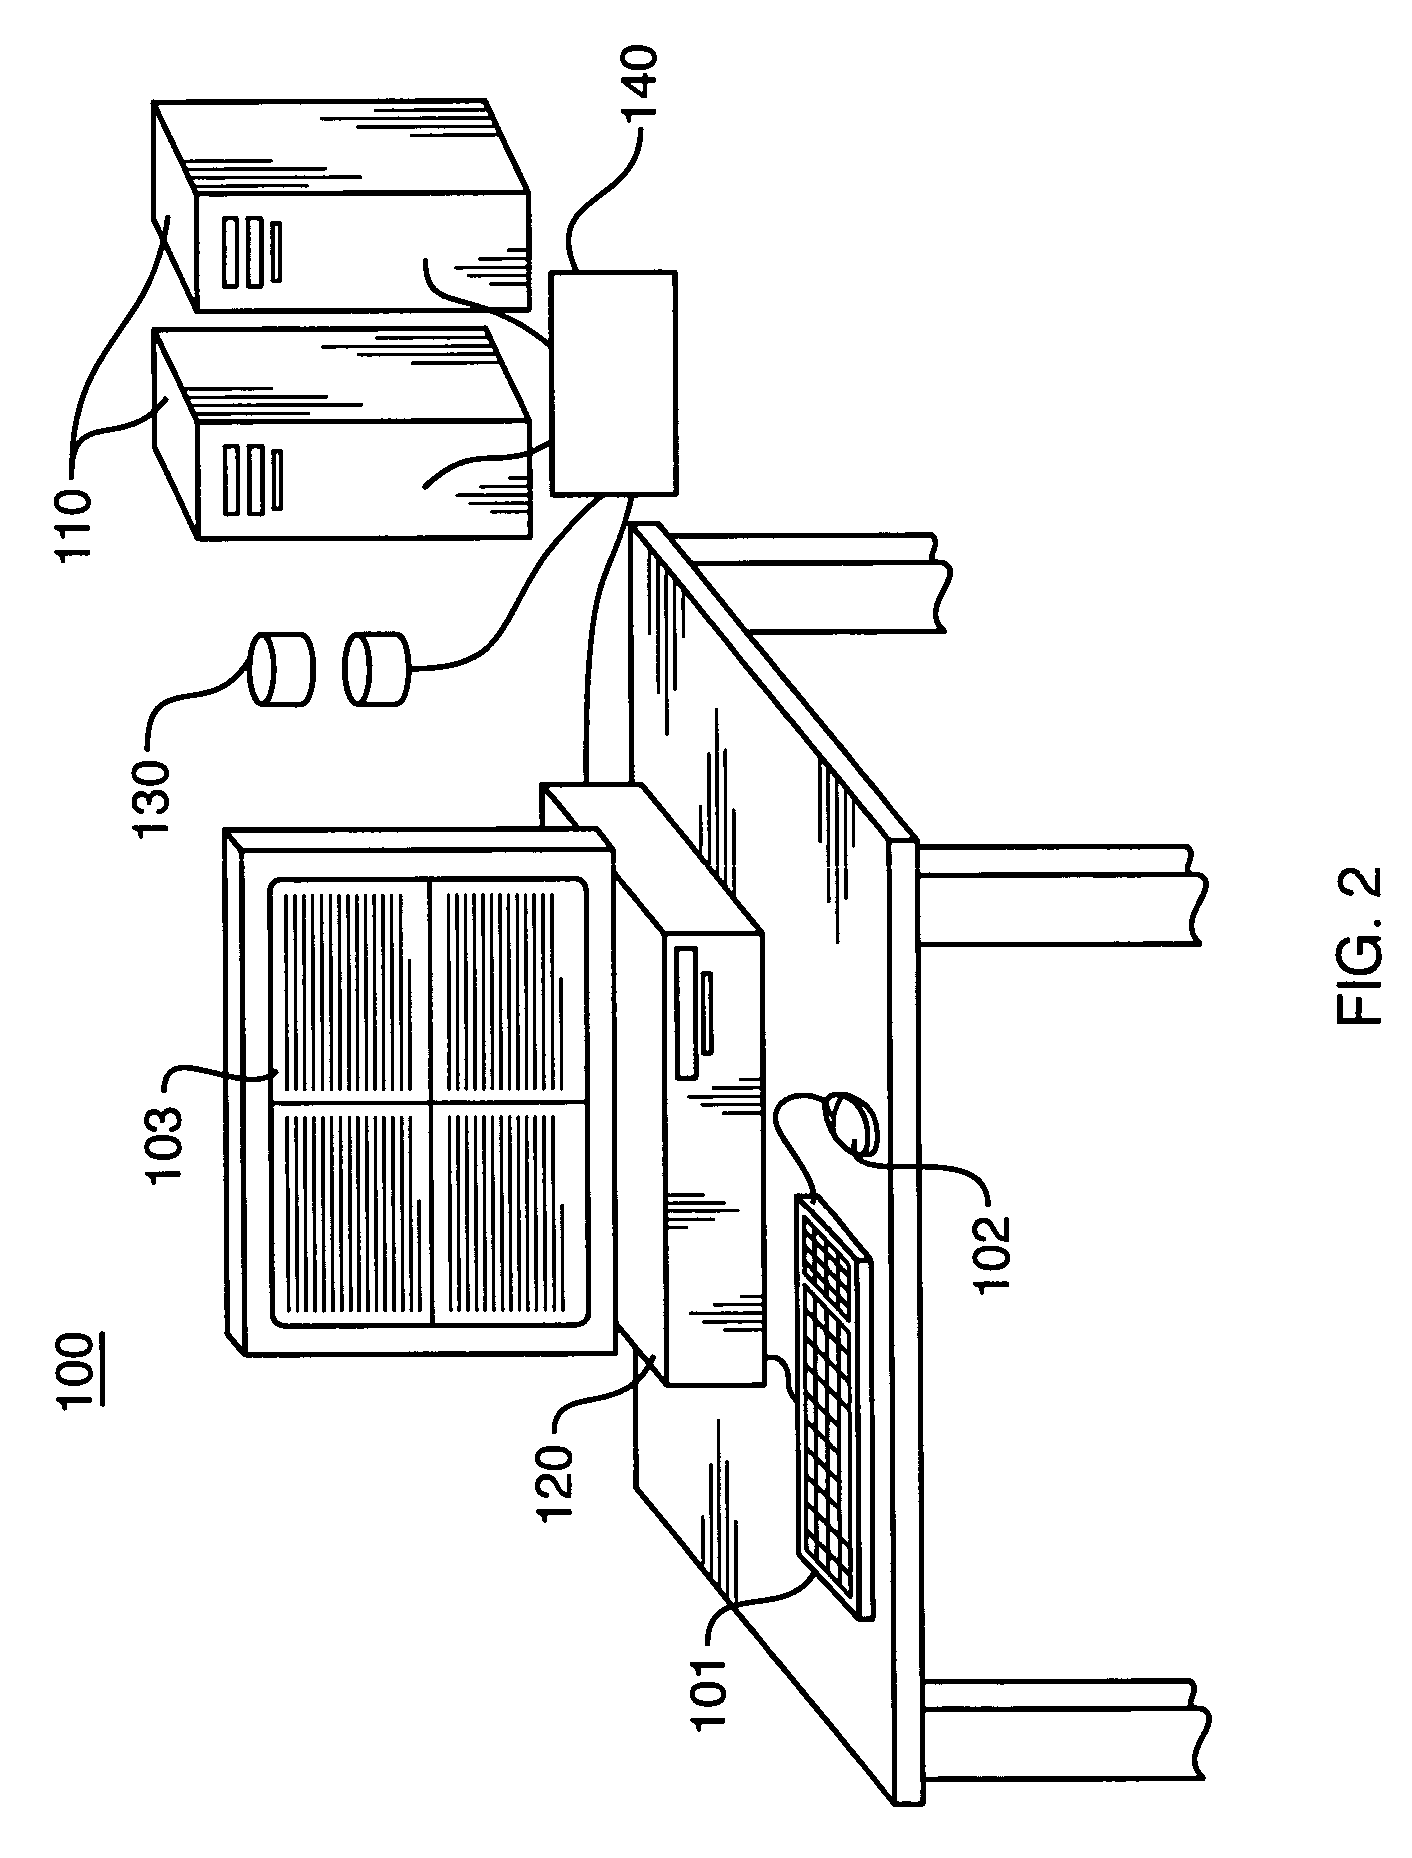 System and method to improve operational status indication and performance based outcomes